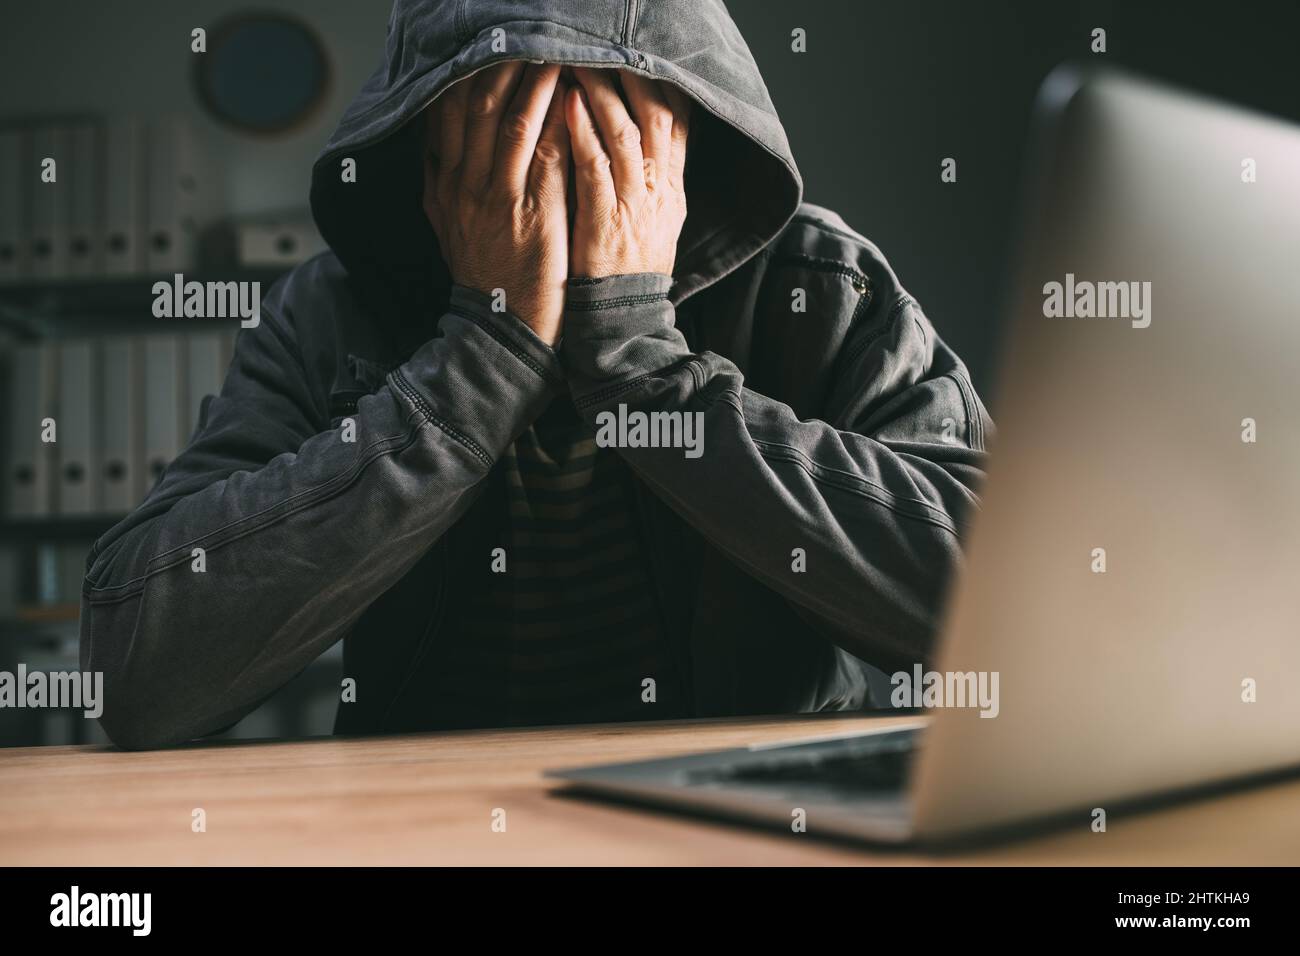 Regretful computer hacker covering face with hands in front of laptop, selective focus Stock Photo